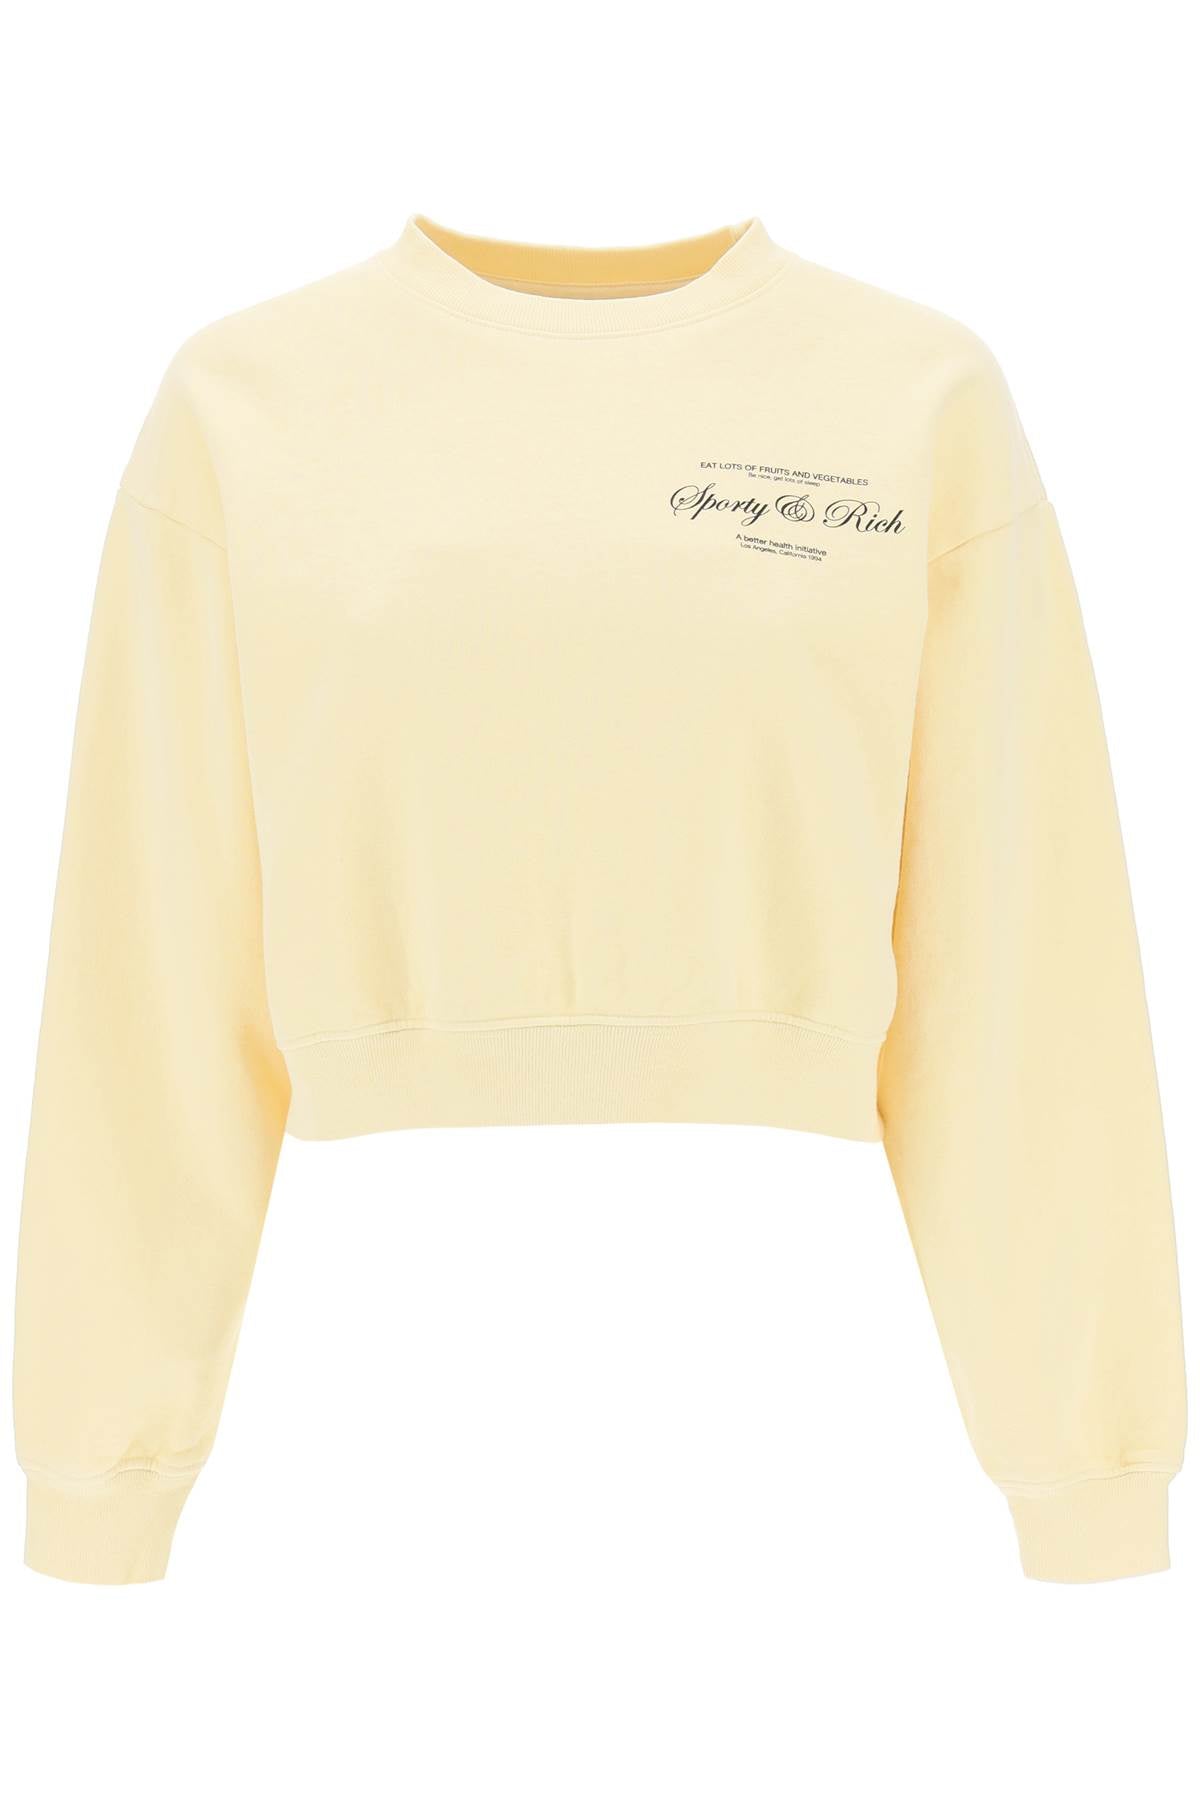 SPORTY AND RICH CROPPED SWEATSHIRT